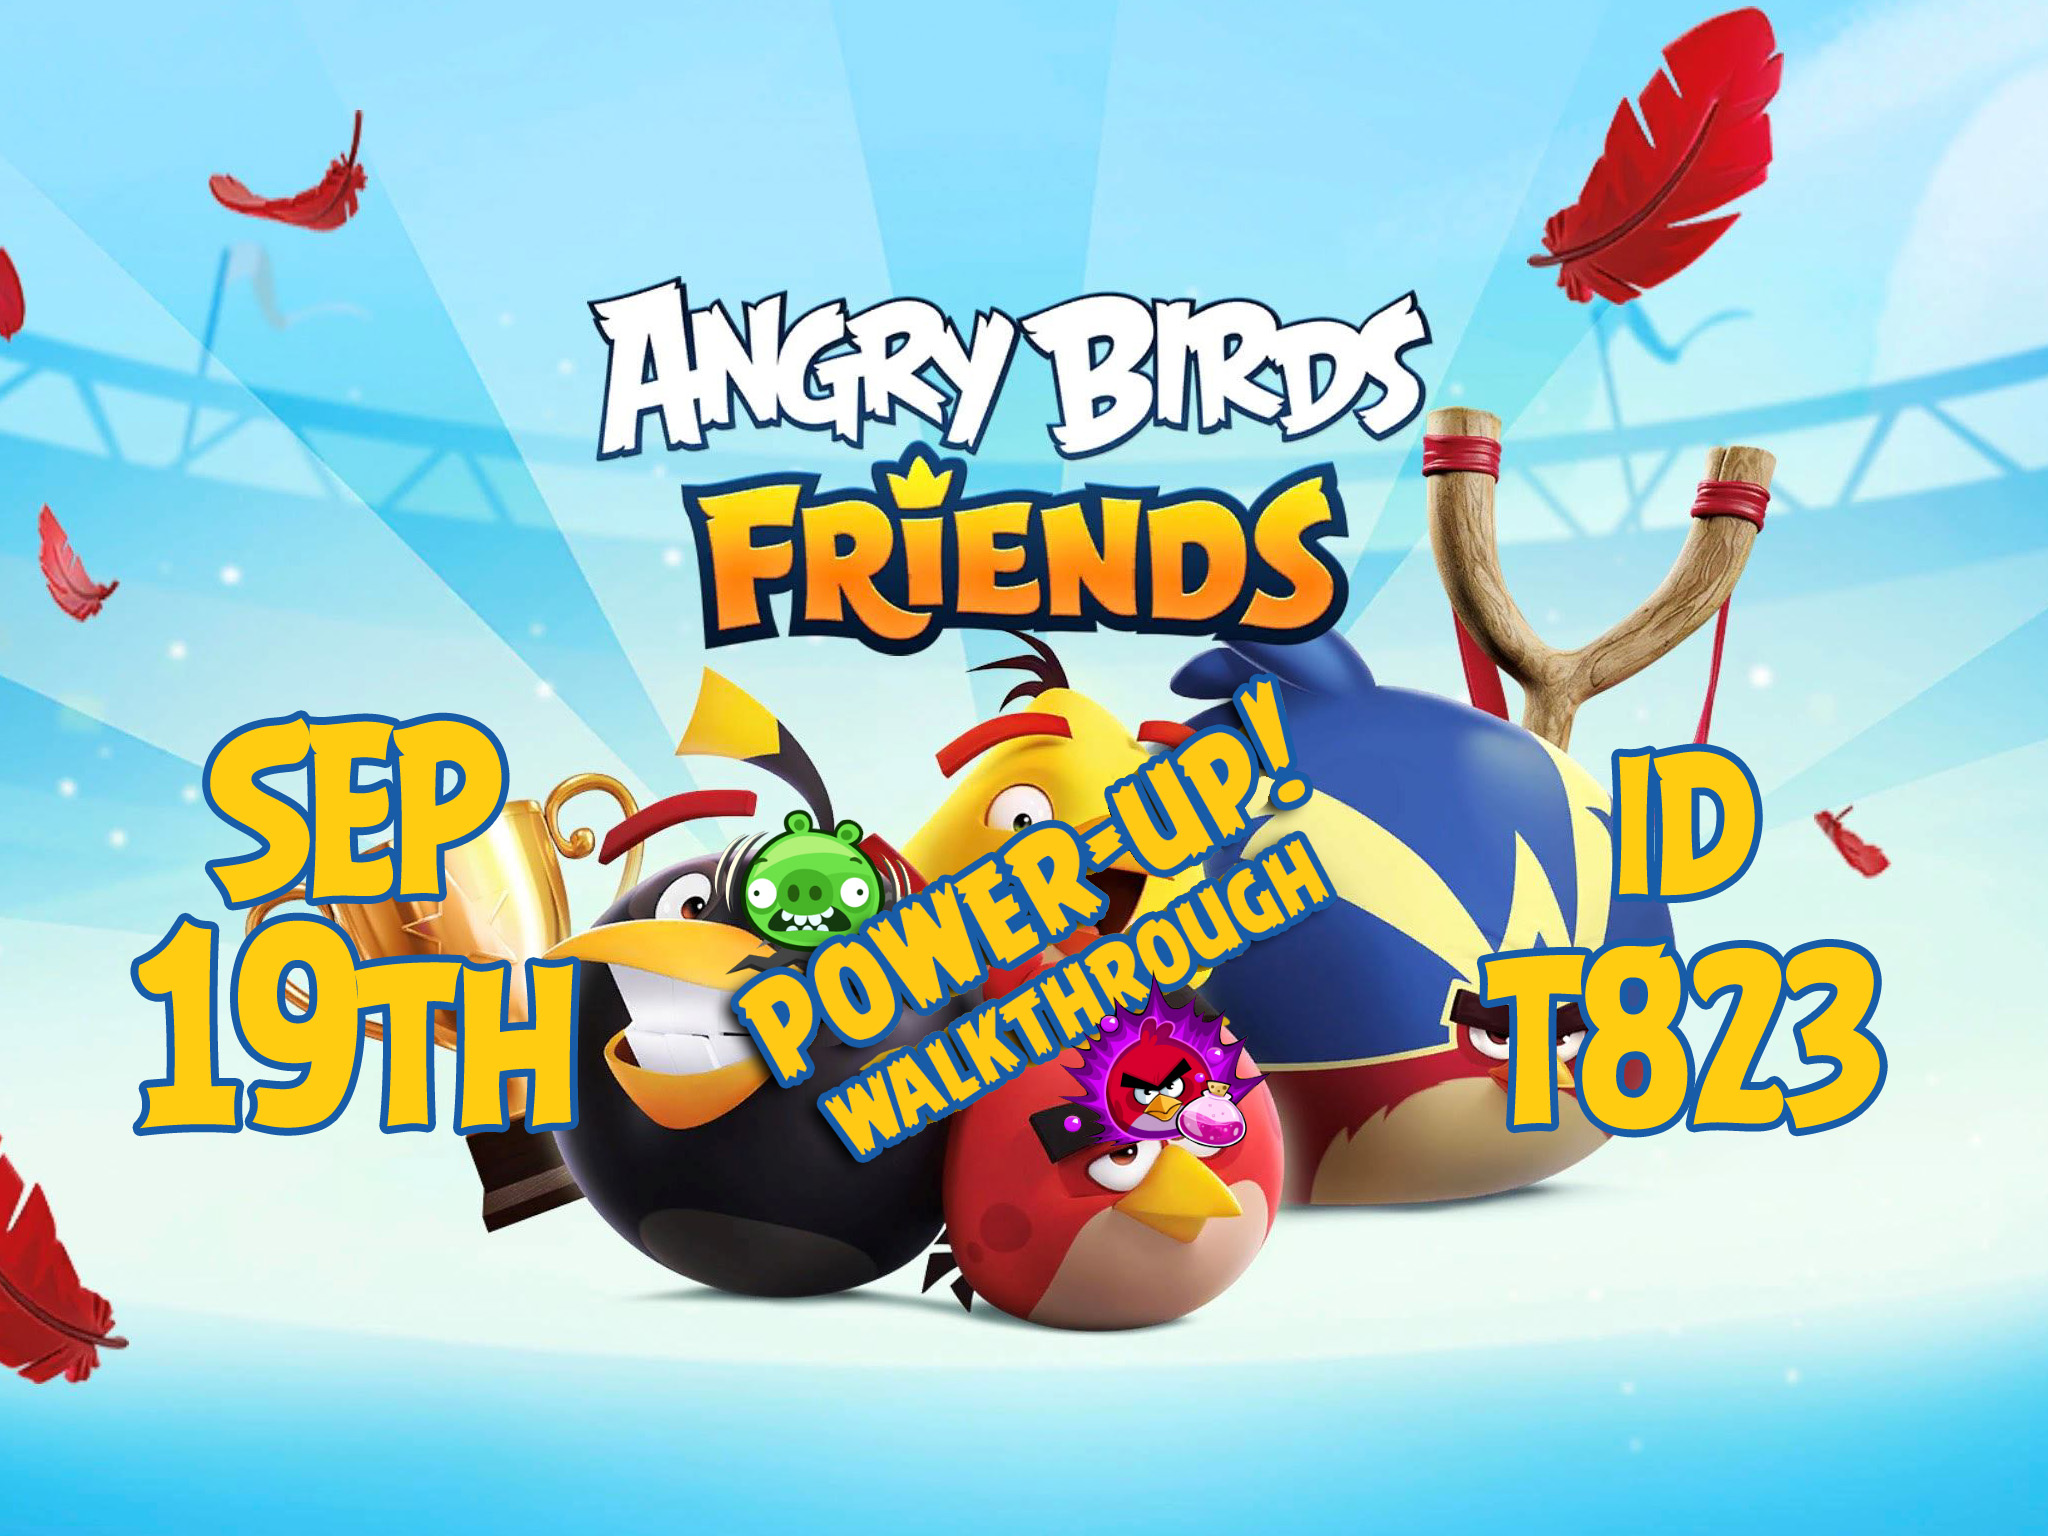 Angry-Birds-Friends-Tournament-T823-Feature-Image-PU